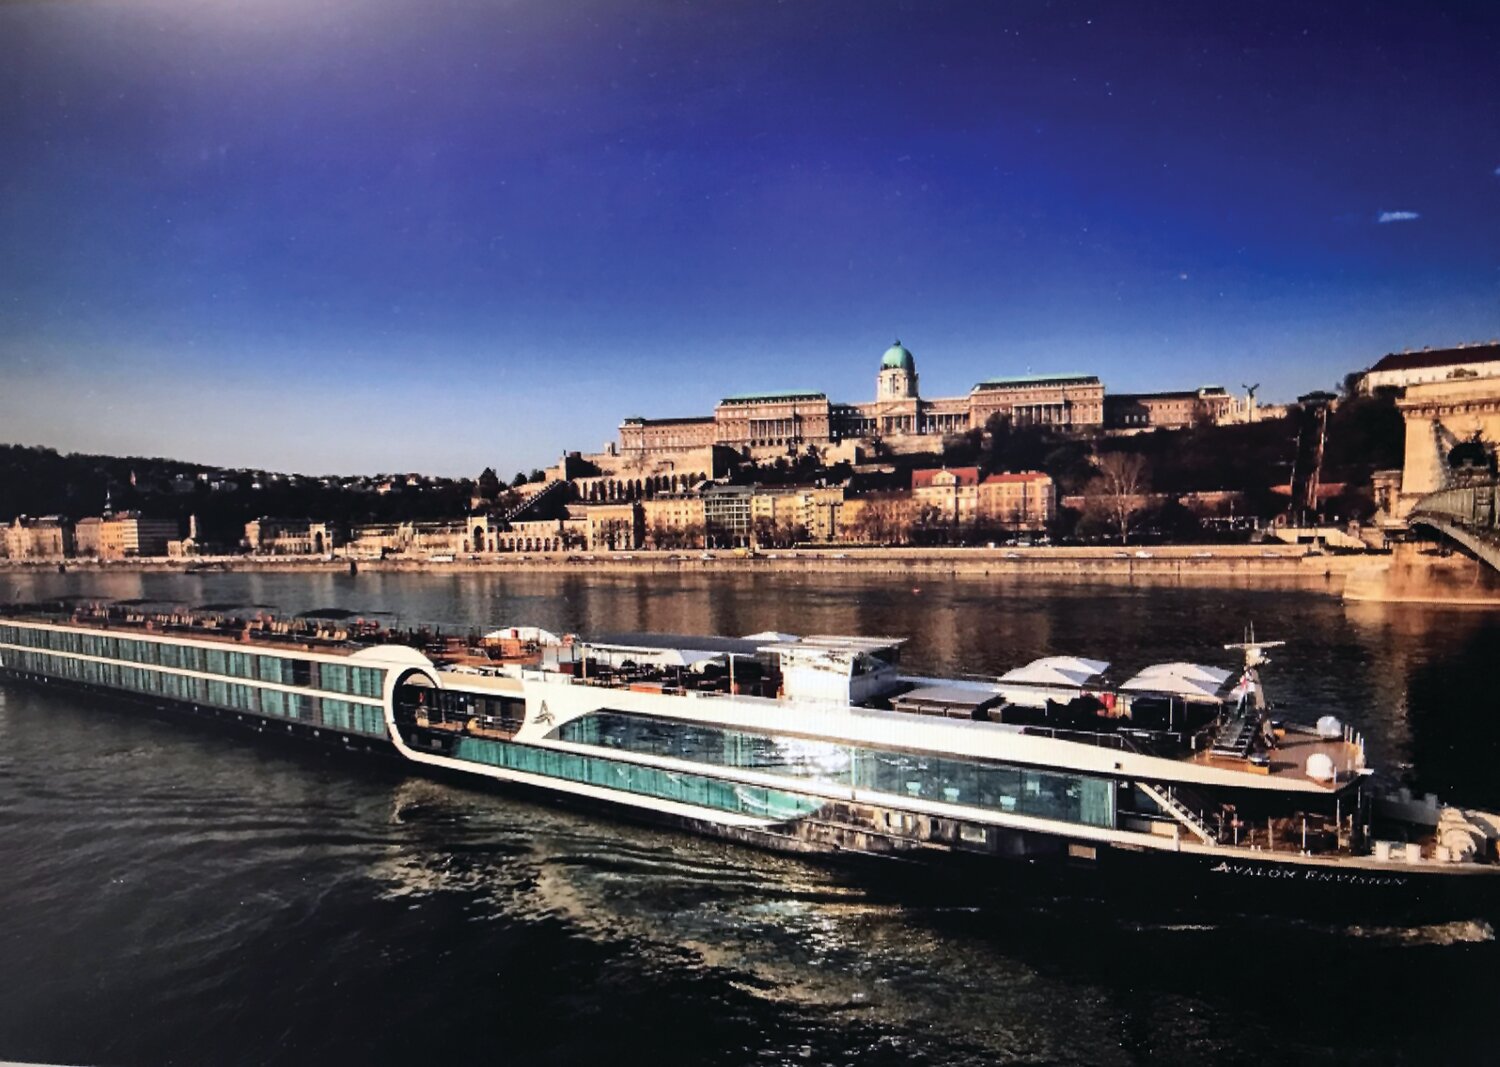 Check out this elegant and top-of-the-line river cruise ship from the fleet of Avalon Waterways, ready to sweep you away for the trip of a lifetime! Call The Travel Connection today to get you started.